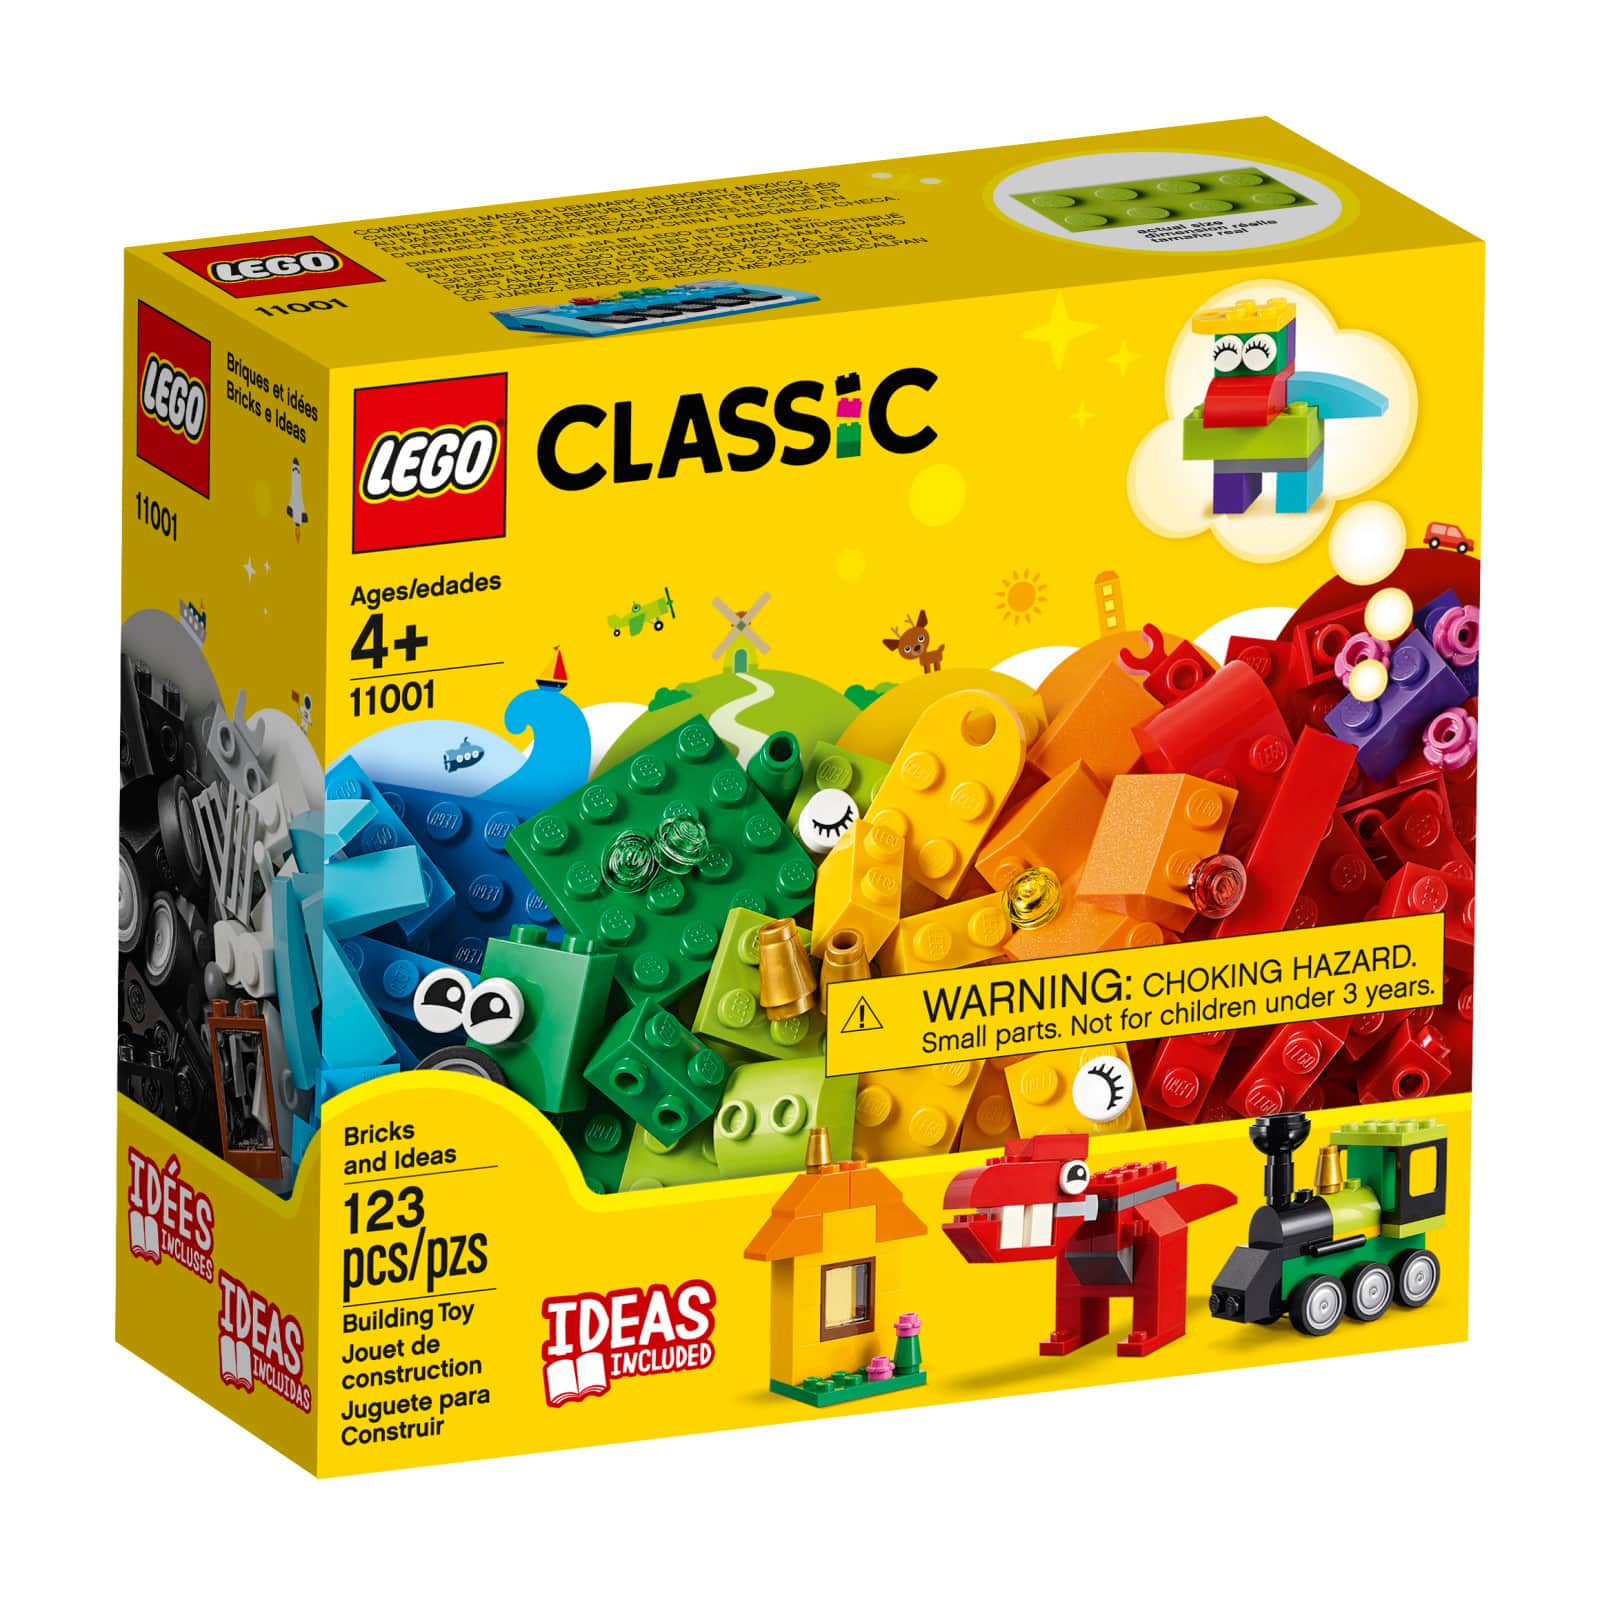 LEGO® Classic Bricks and Ideas at Michaels